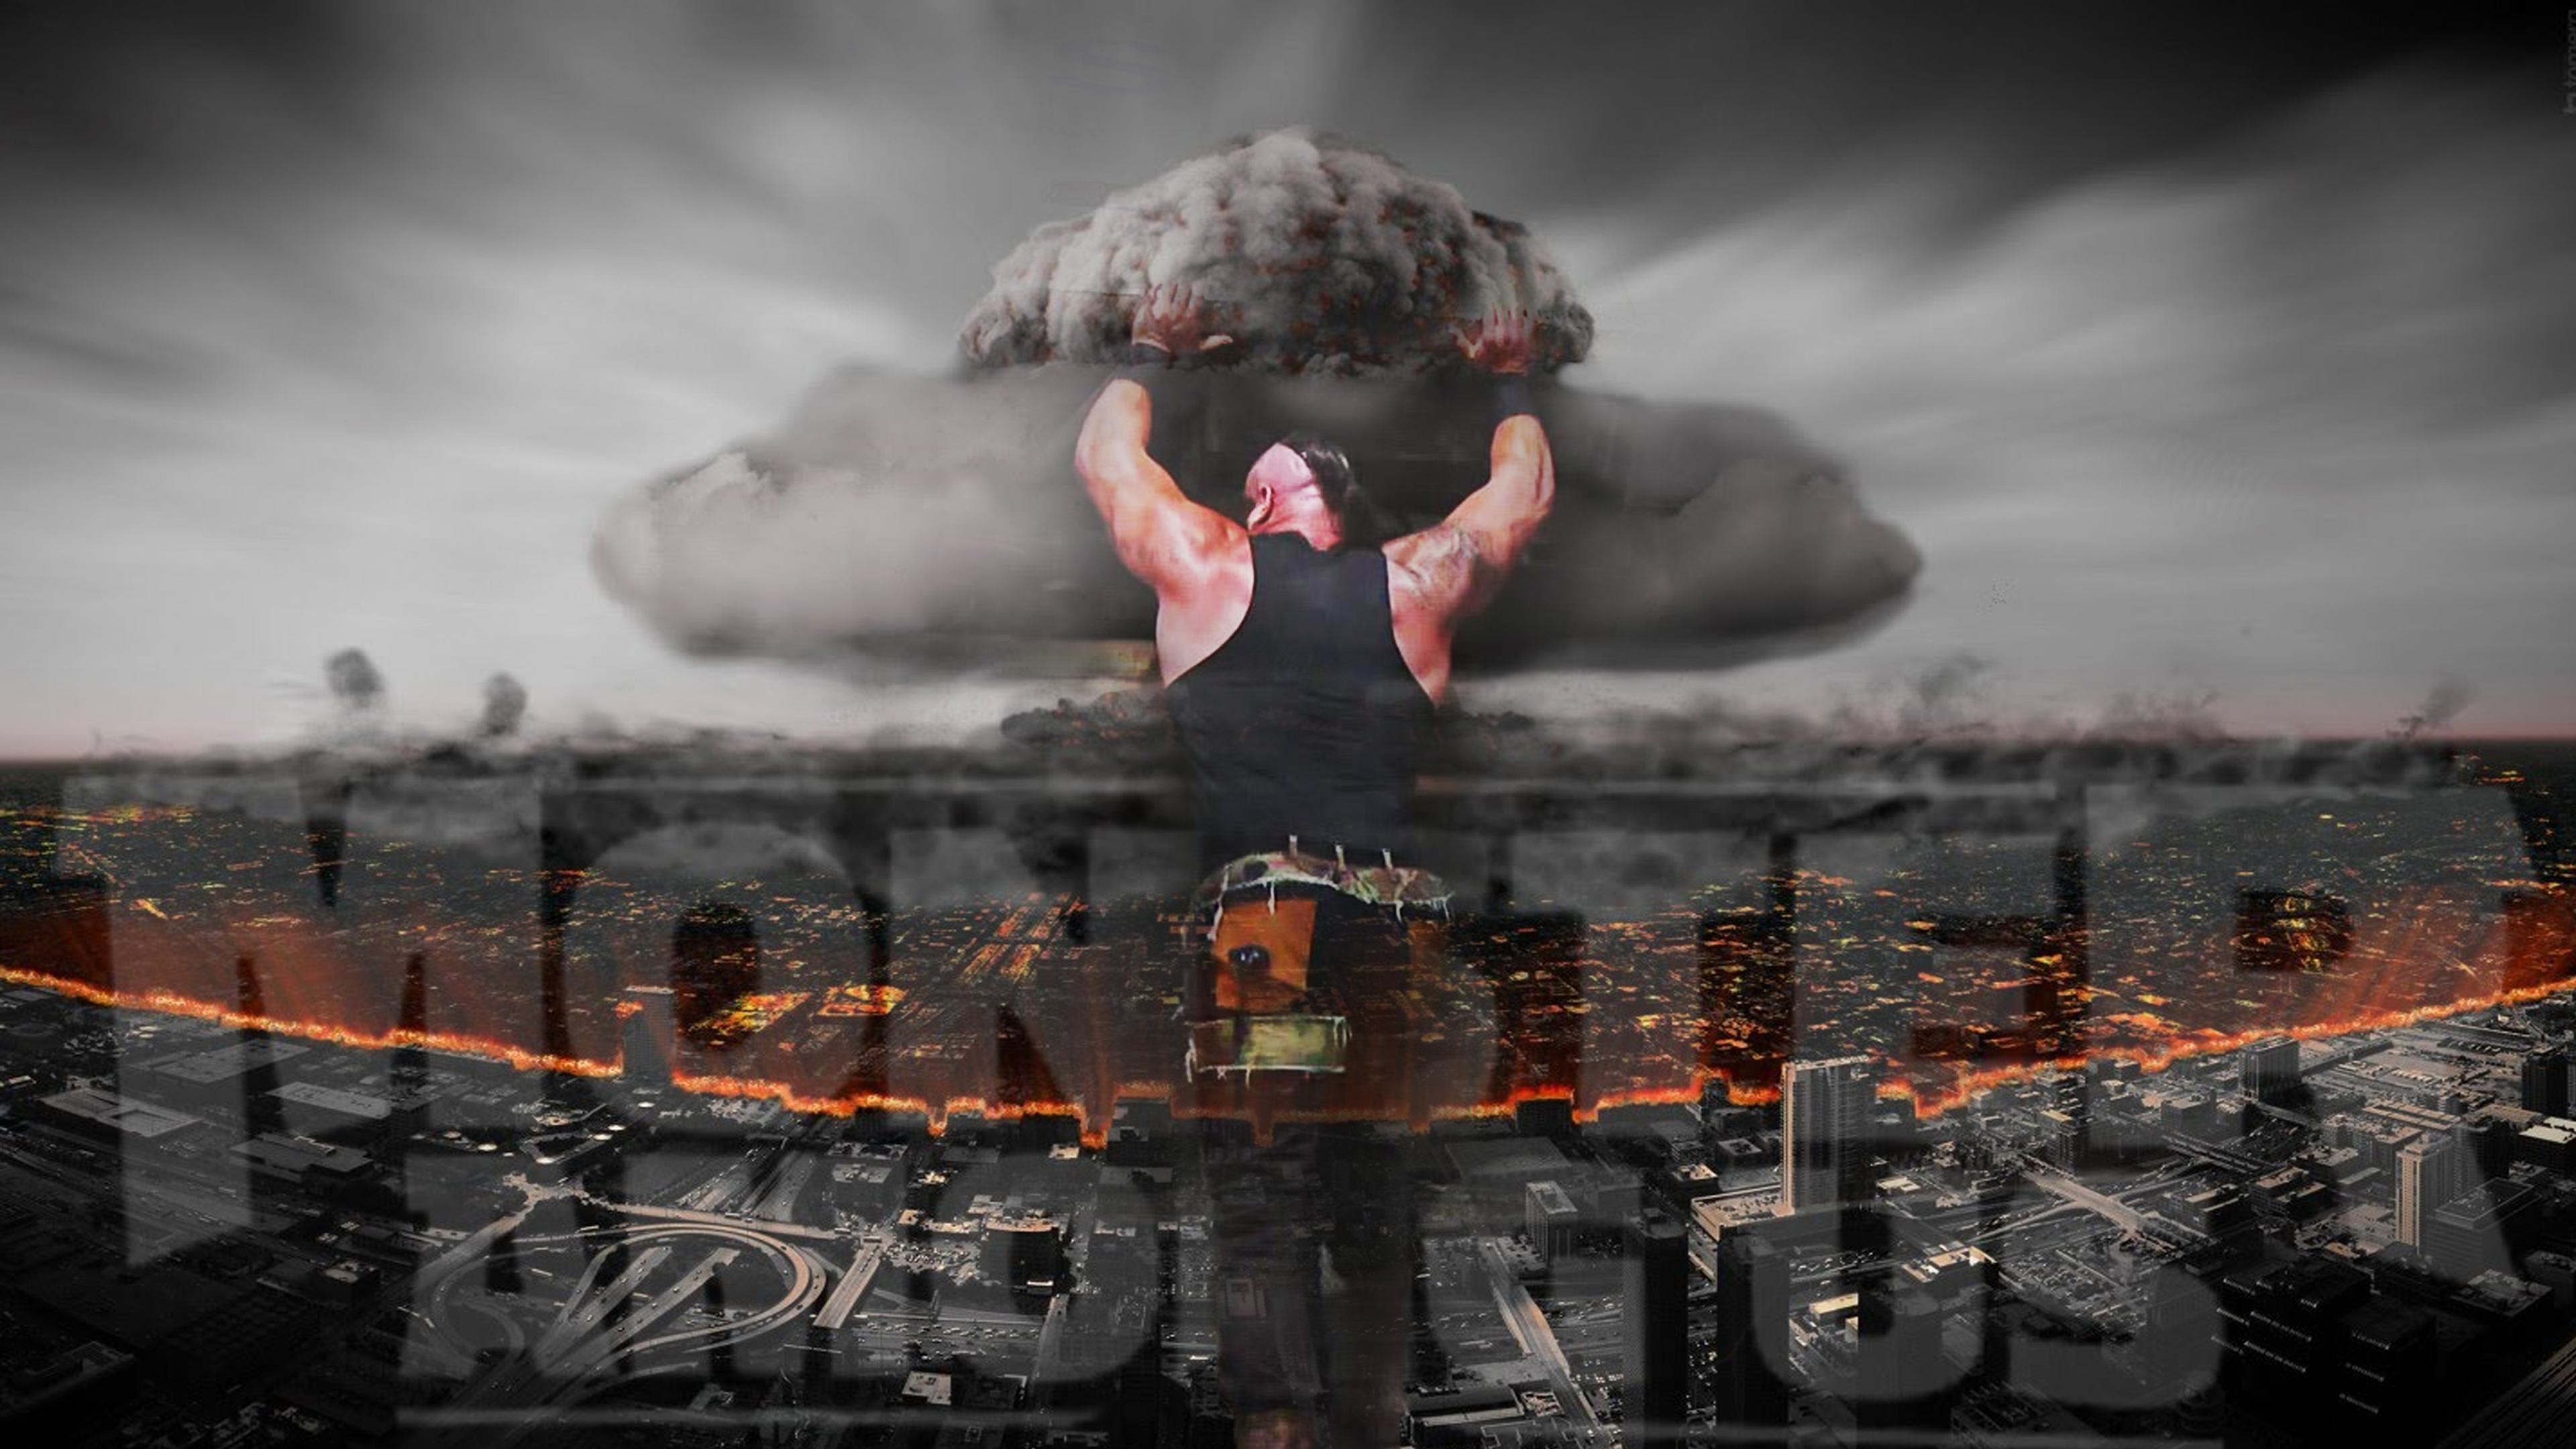 Braun Strowman Monster Among Us Wallpaper By Tynick98 On